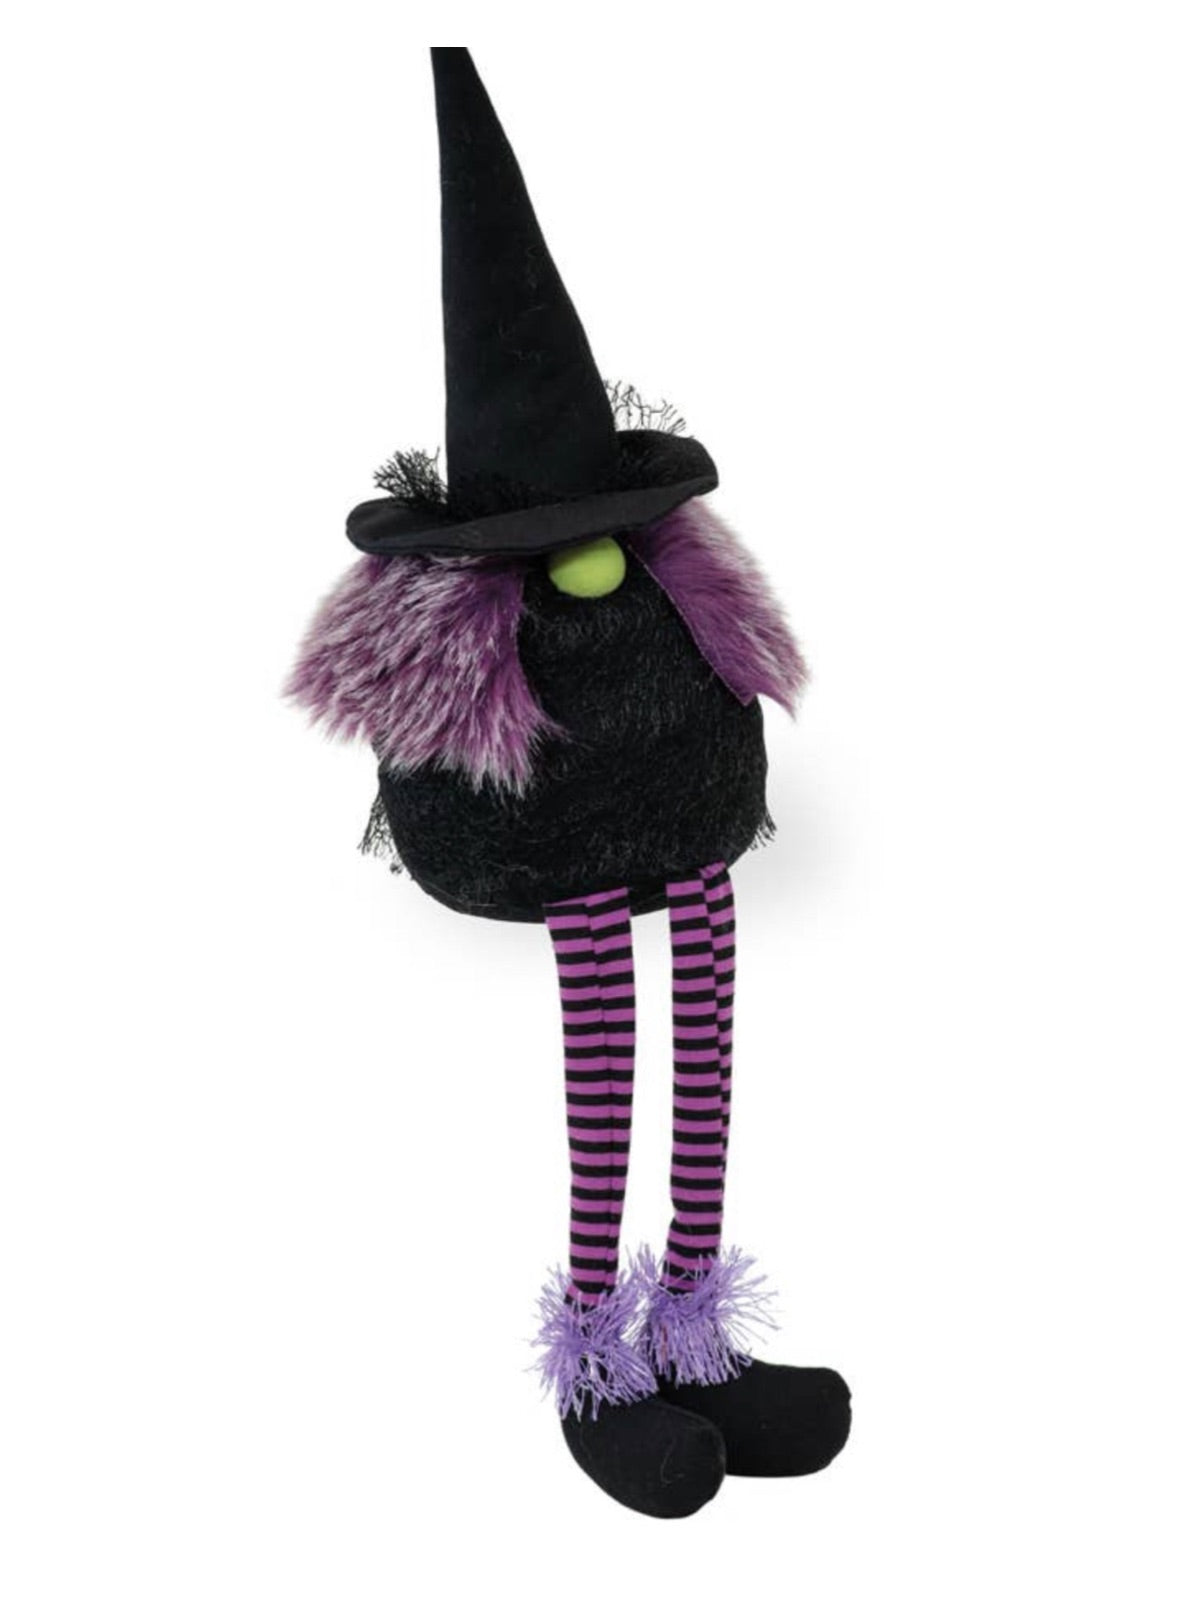 Turn your home into a spooky sight with the Wendy Witch Gnome. Wendy witch gnome sits gracefully and features a fun purple and black outfit that blends in with your other Halloween decor. 